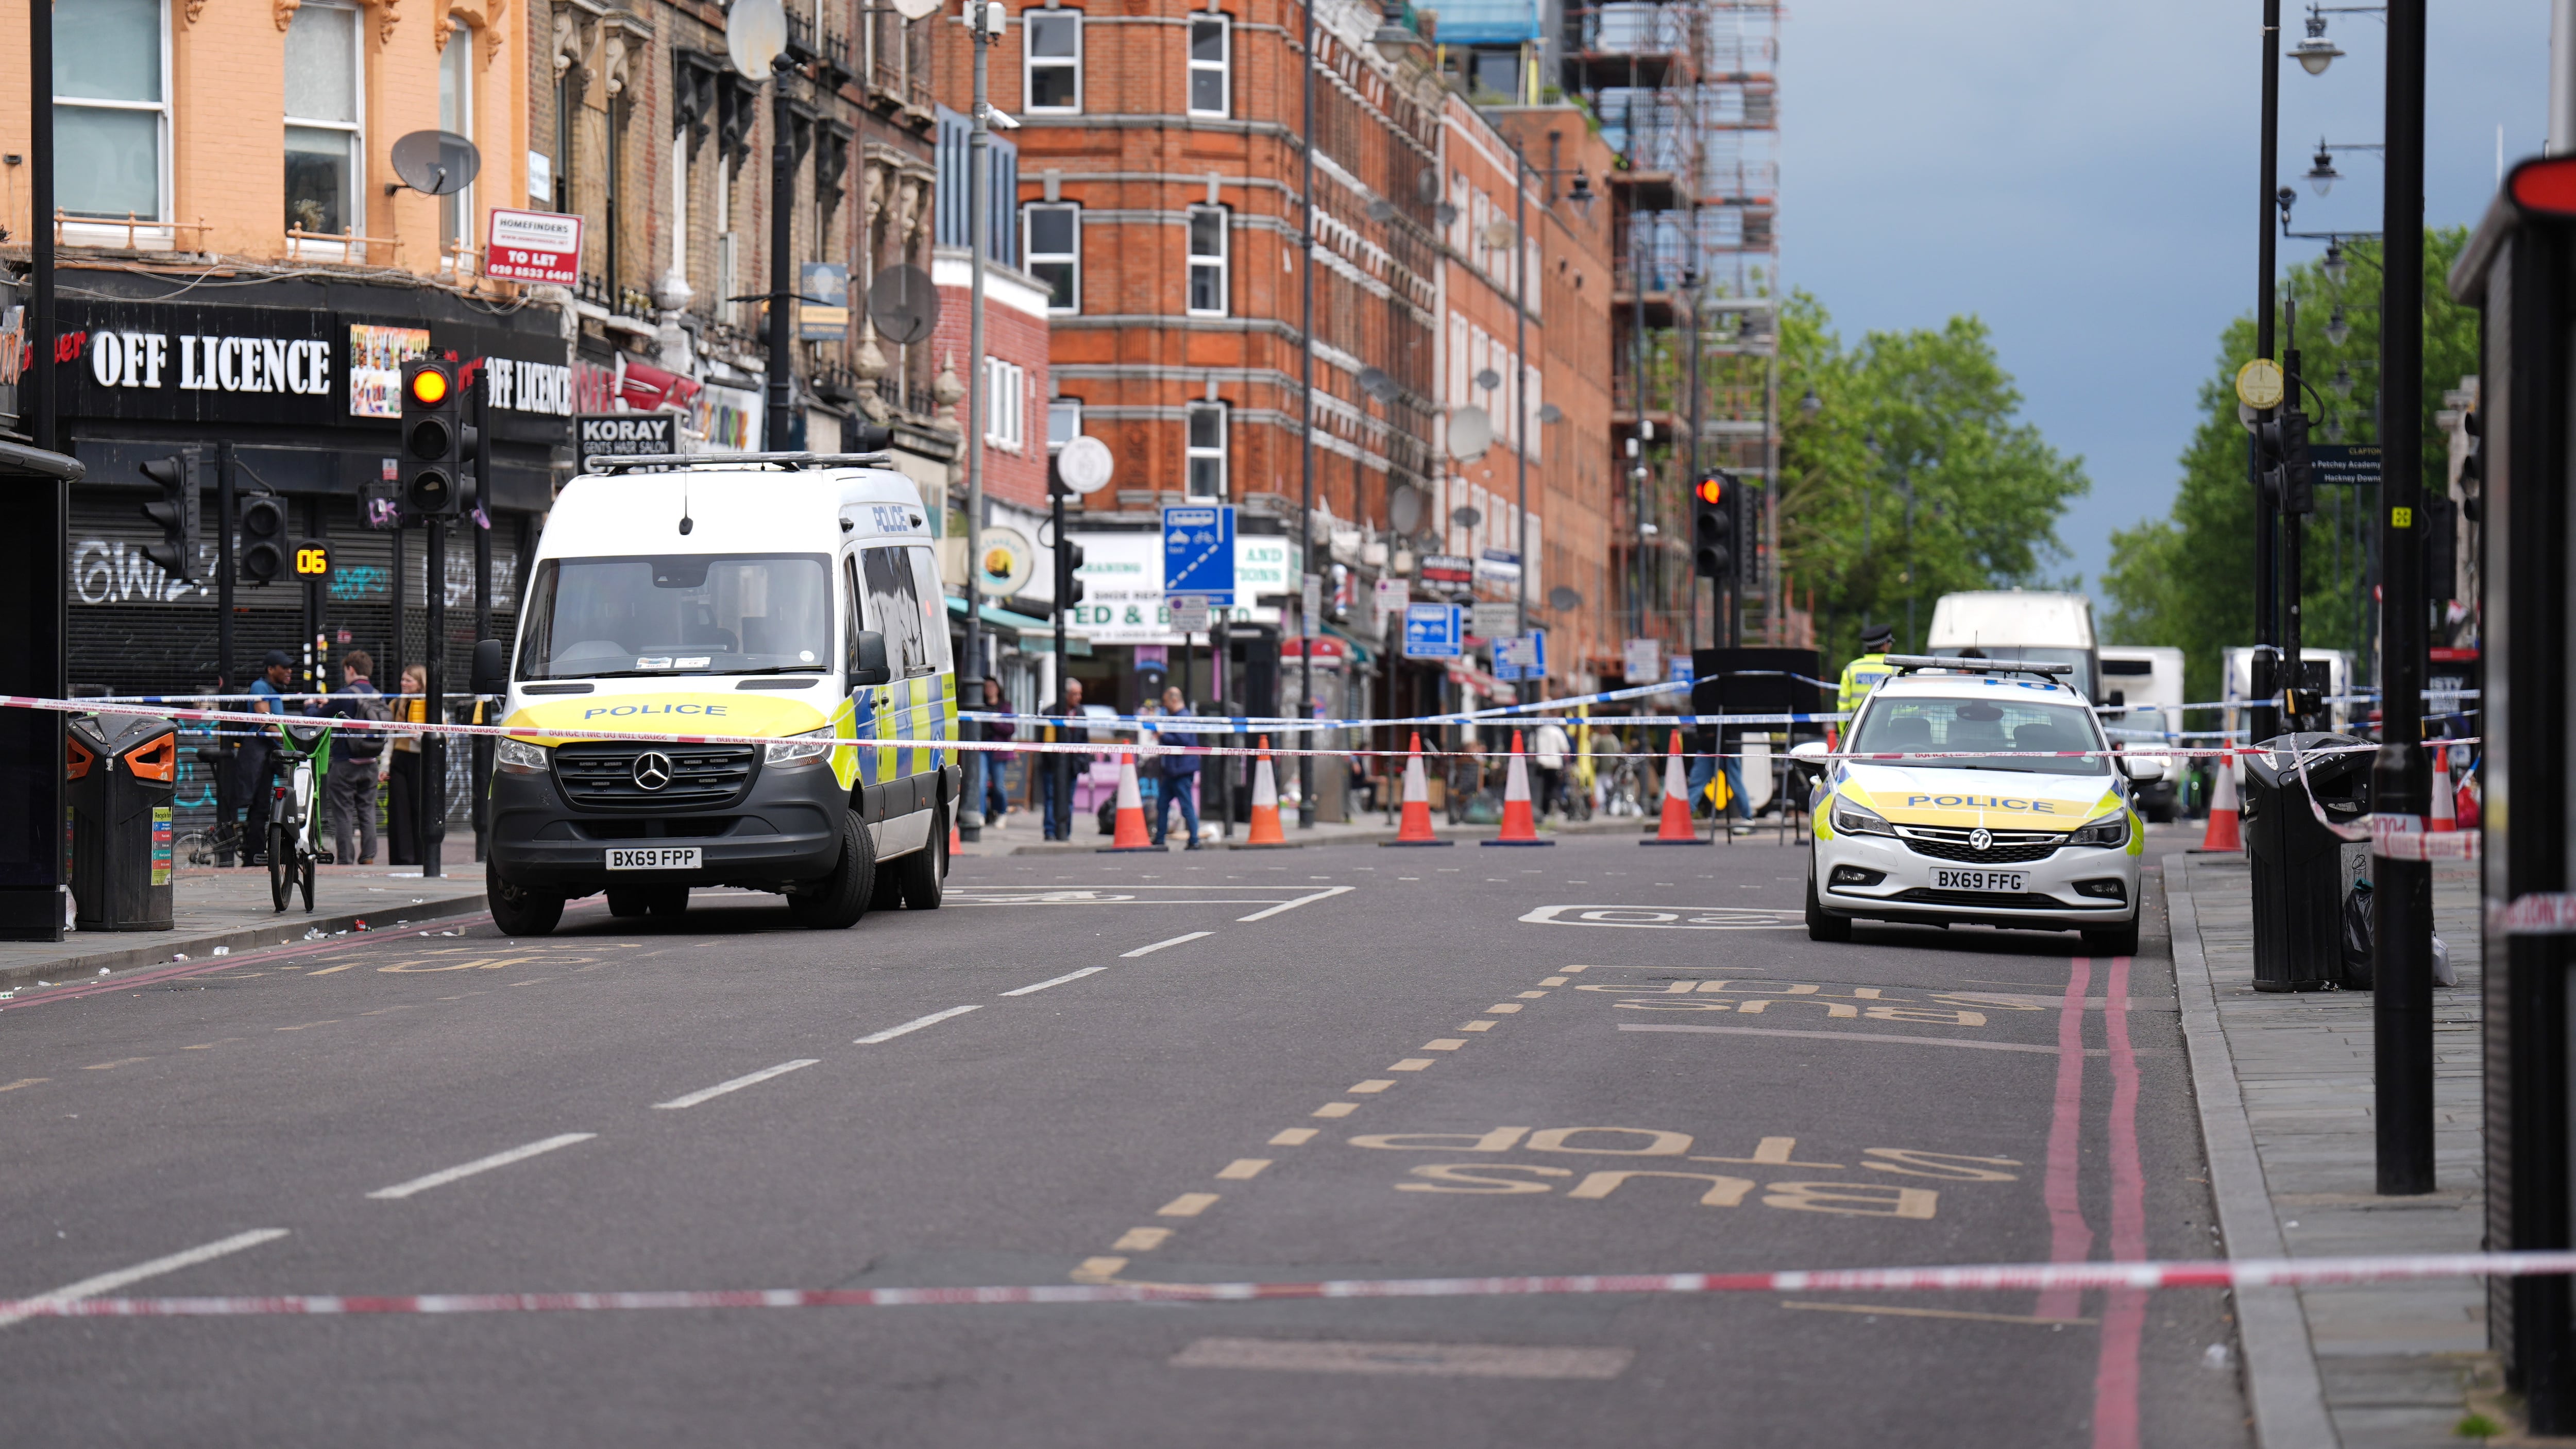 Police at the scene of the shooting in Kingsland High Street, Hackney, east London